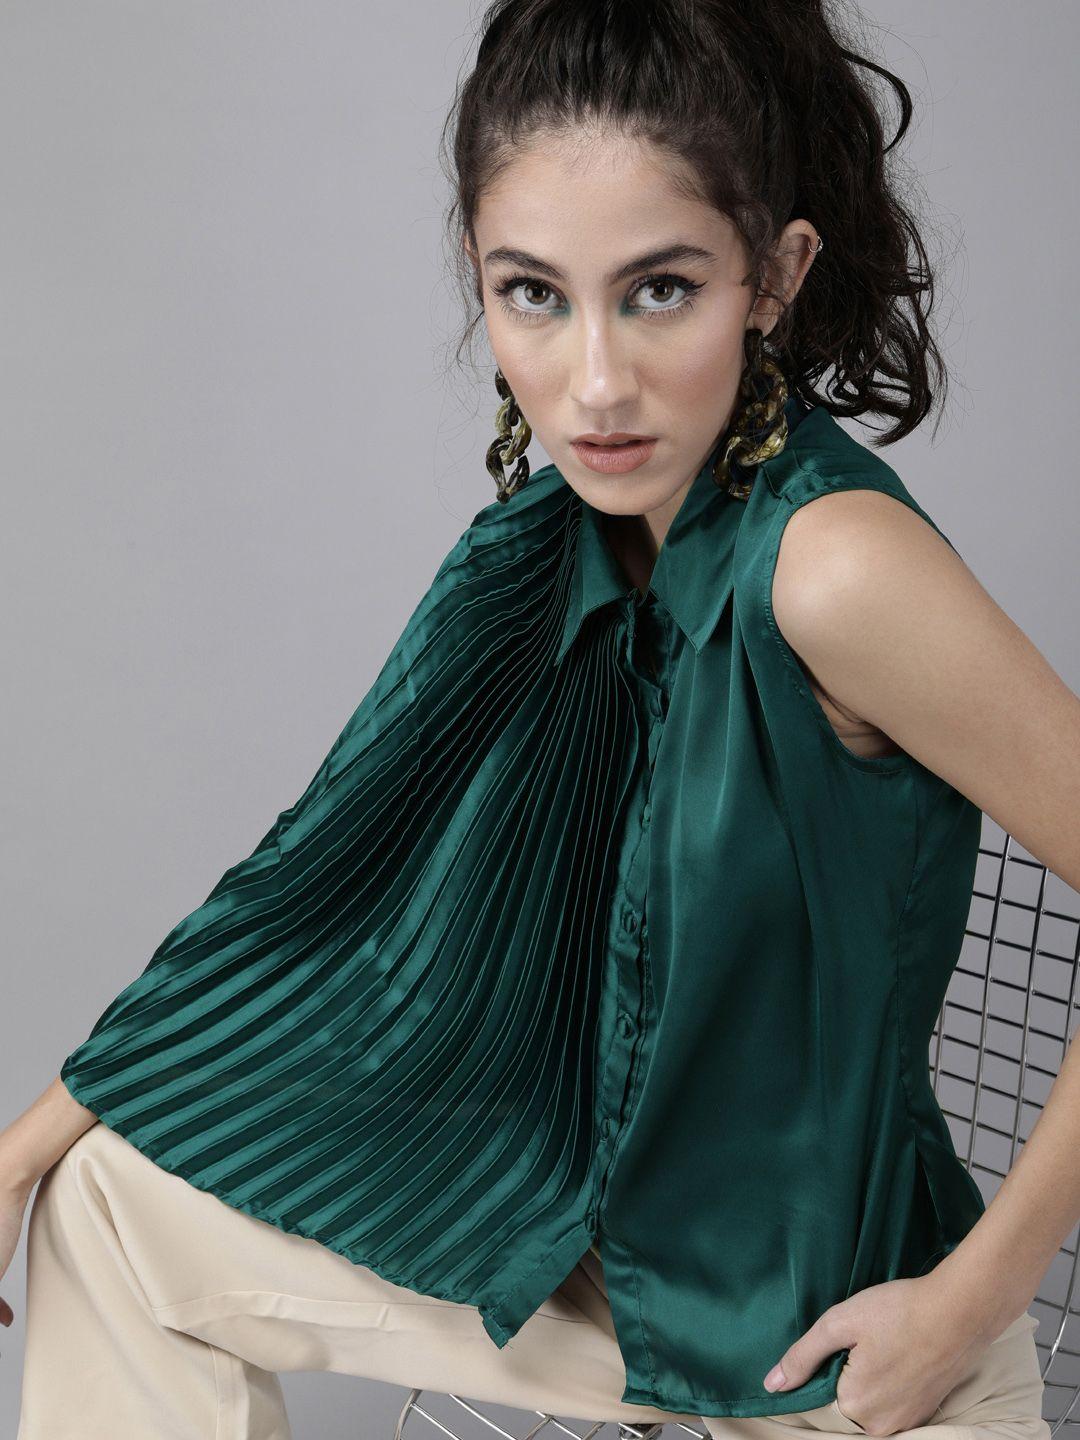 the dry state green accordion pleated sleeves accordion pleats satin shirt style top